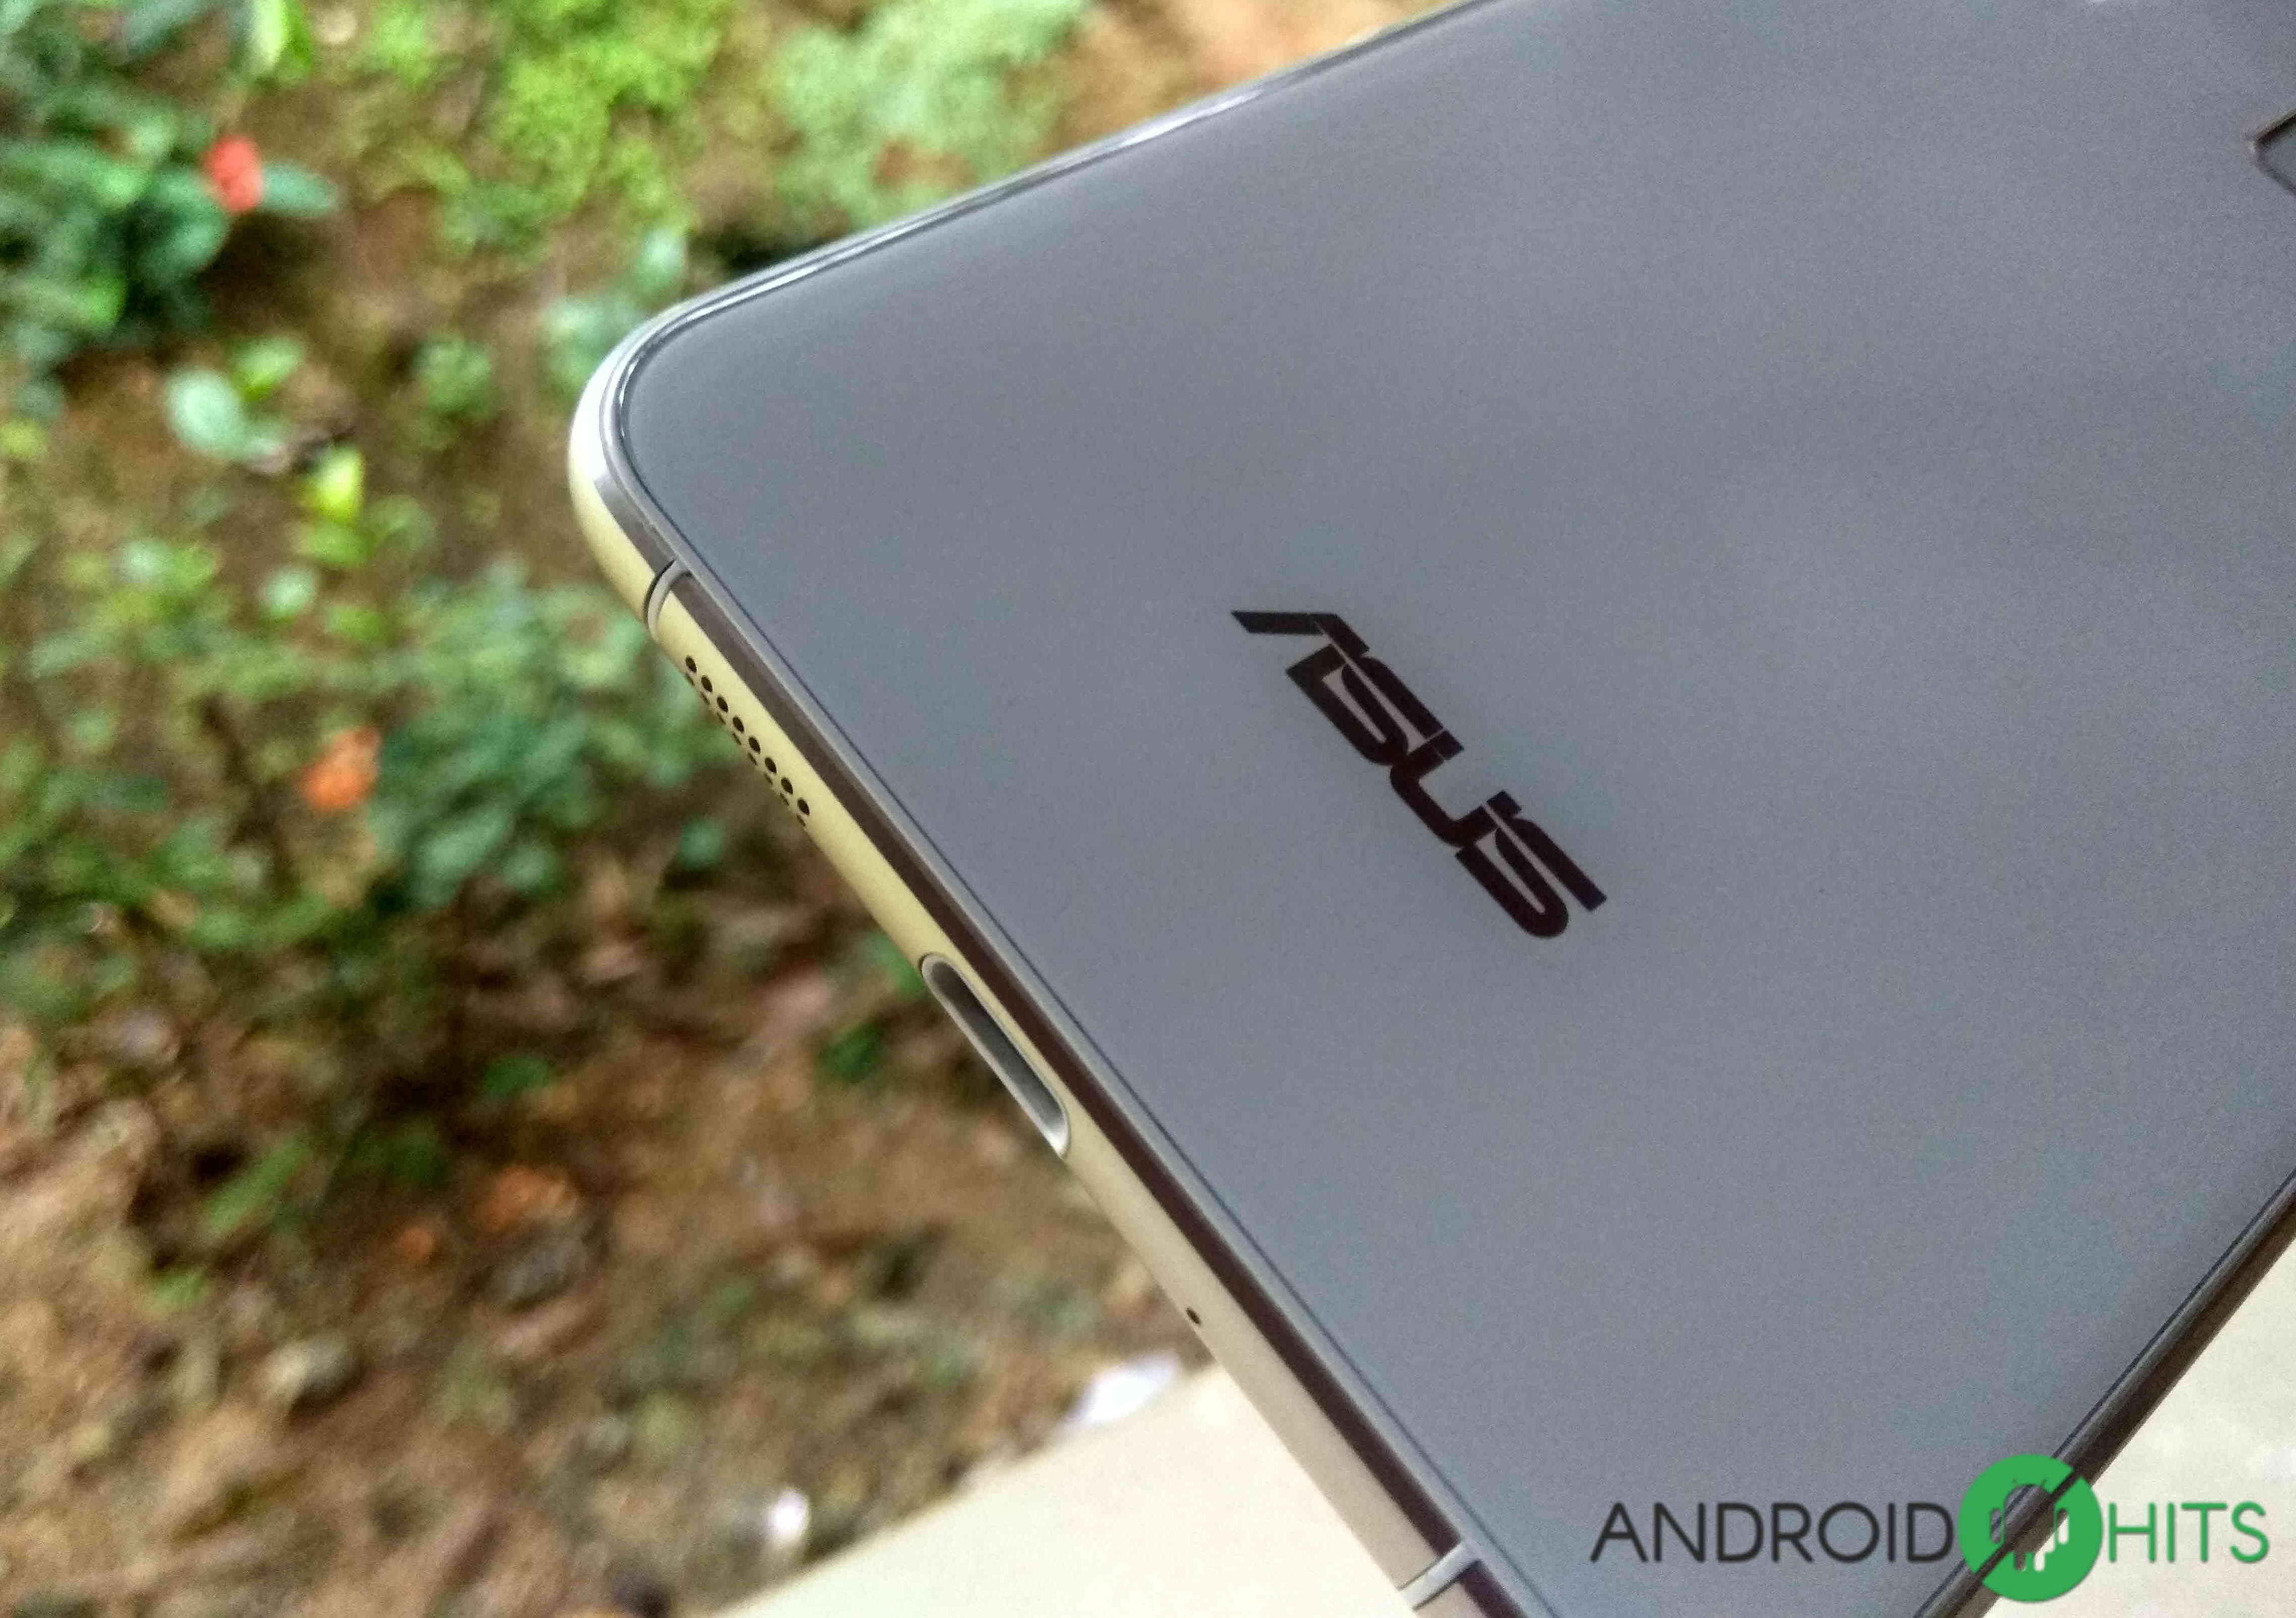 Asus Zenfone 3 Review: Well polished, pricey mid-ranger 2